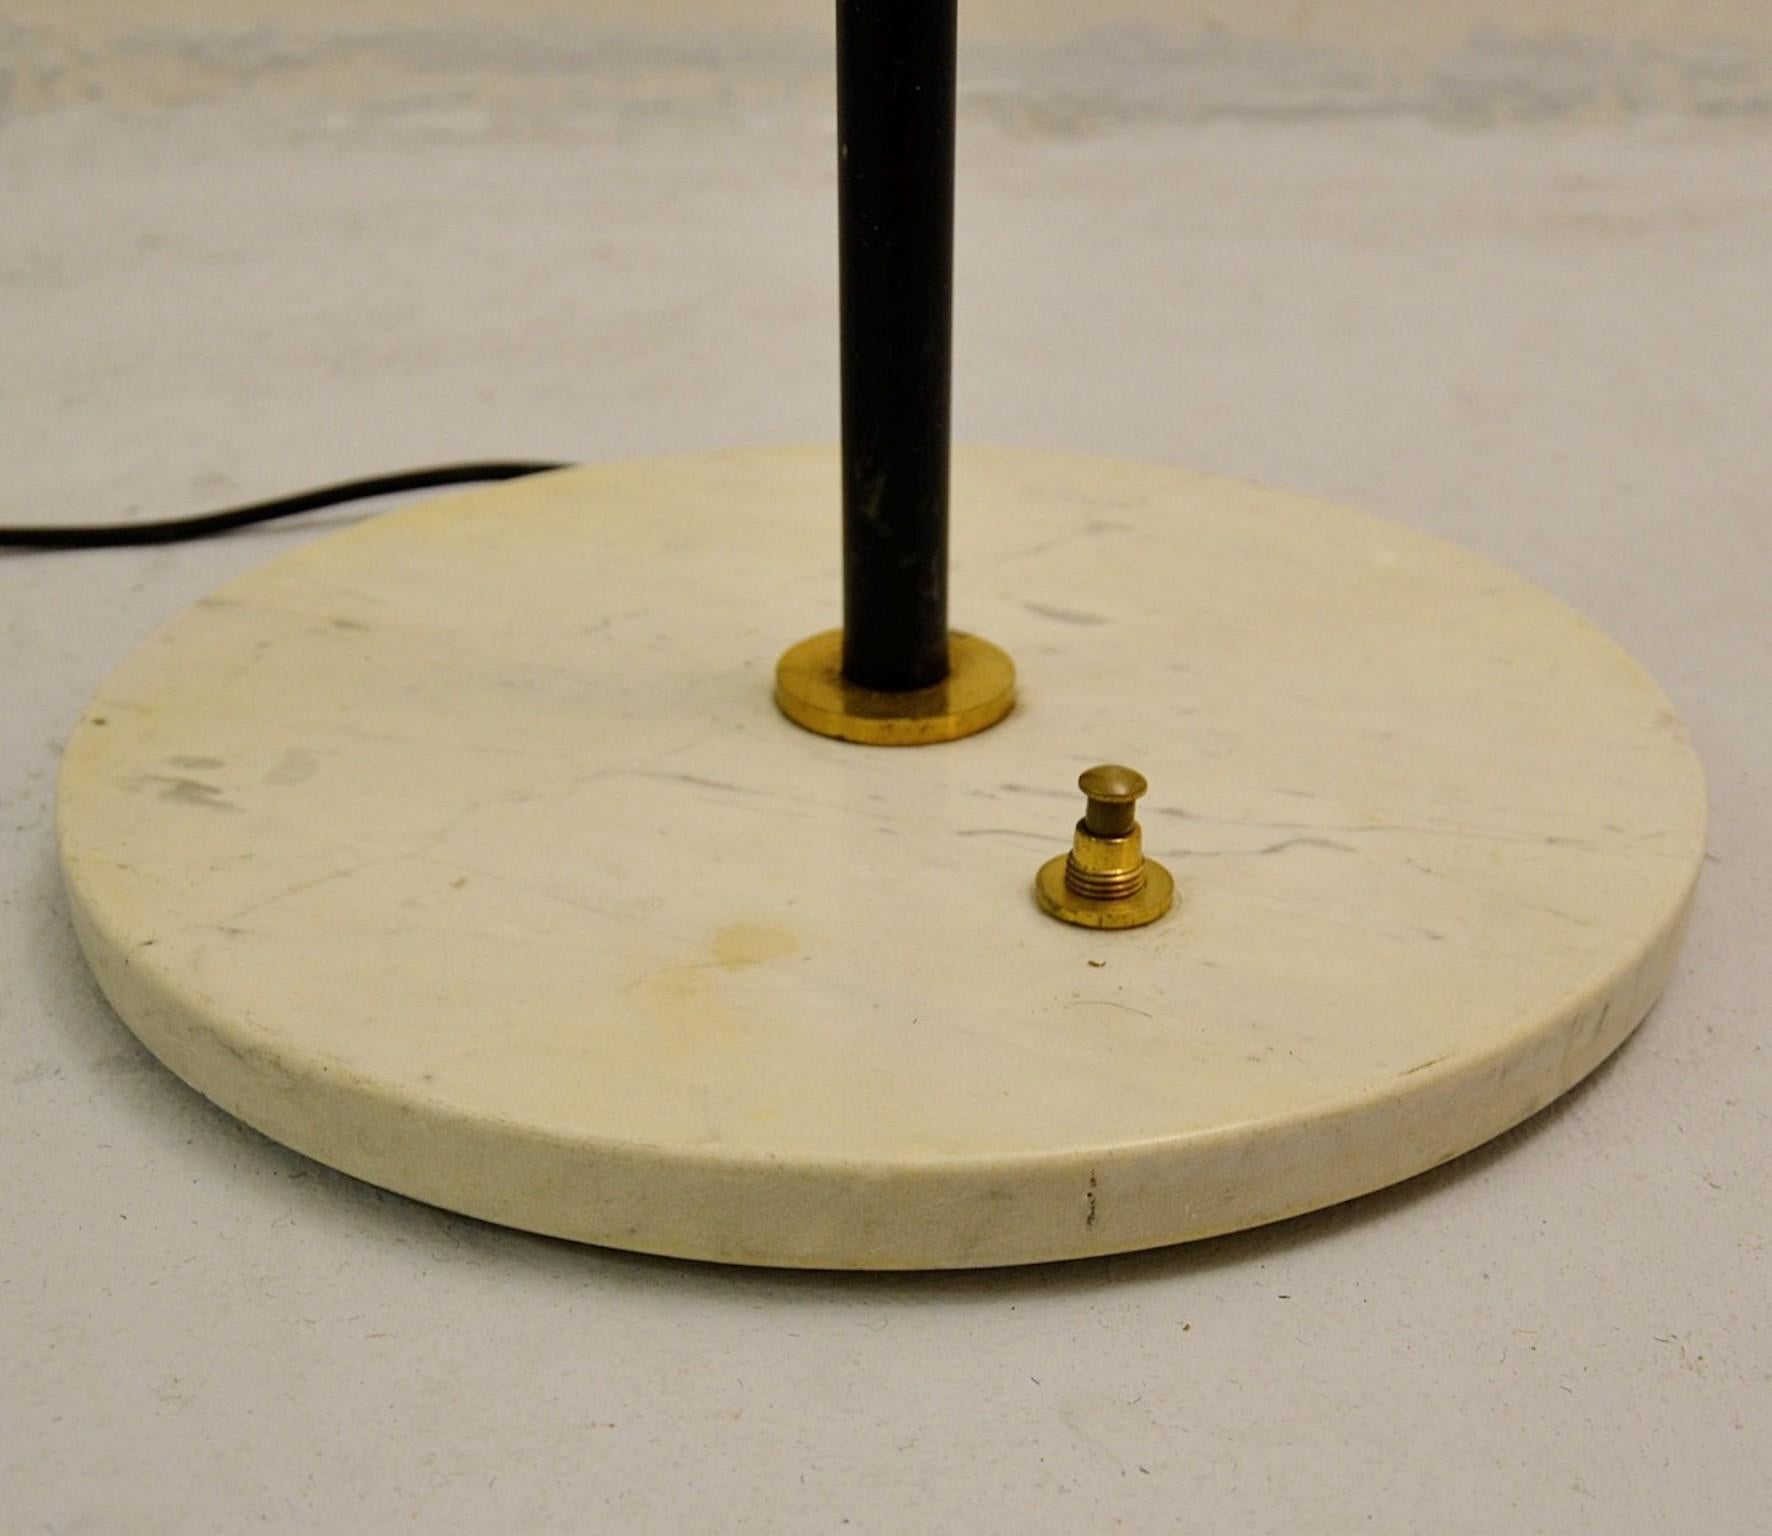 Stilnovo Floor Lamp With Marble Base and Brass Arm, 1950s For Sale 1